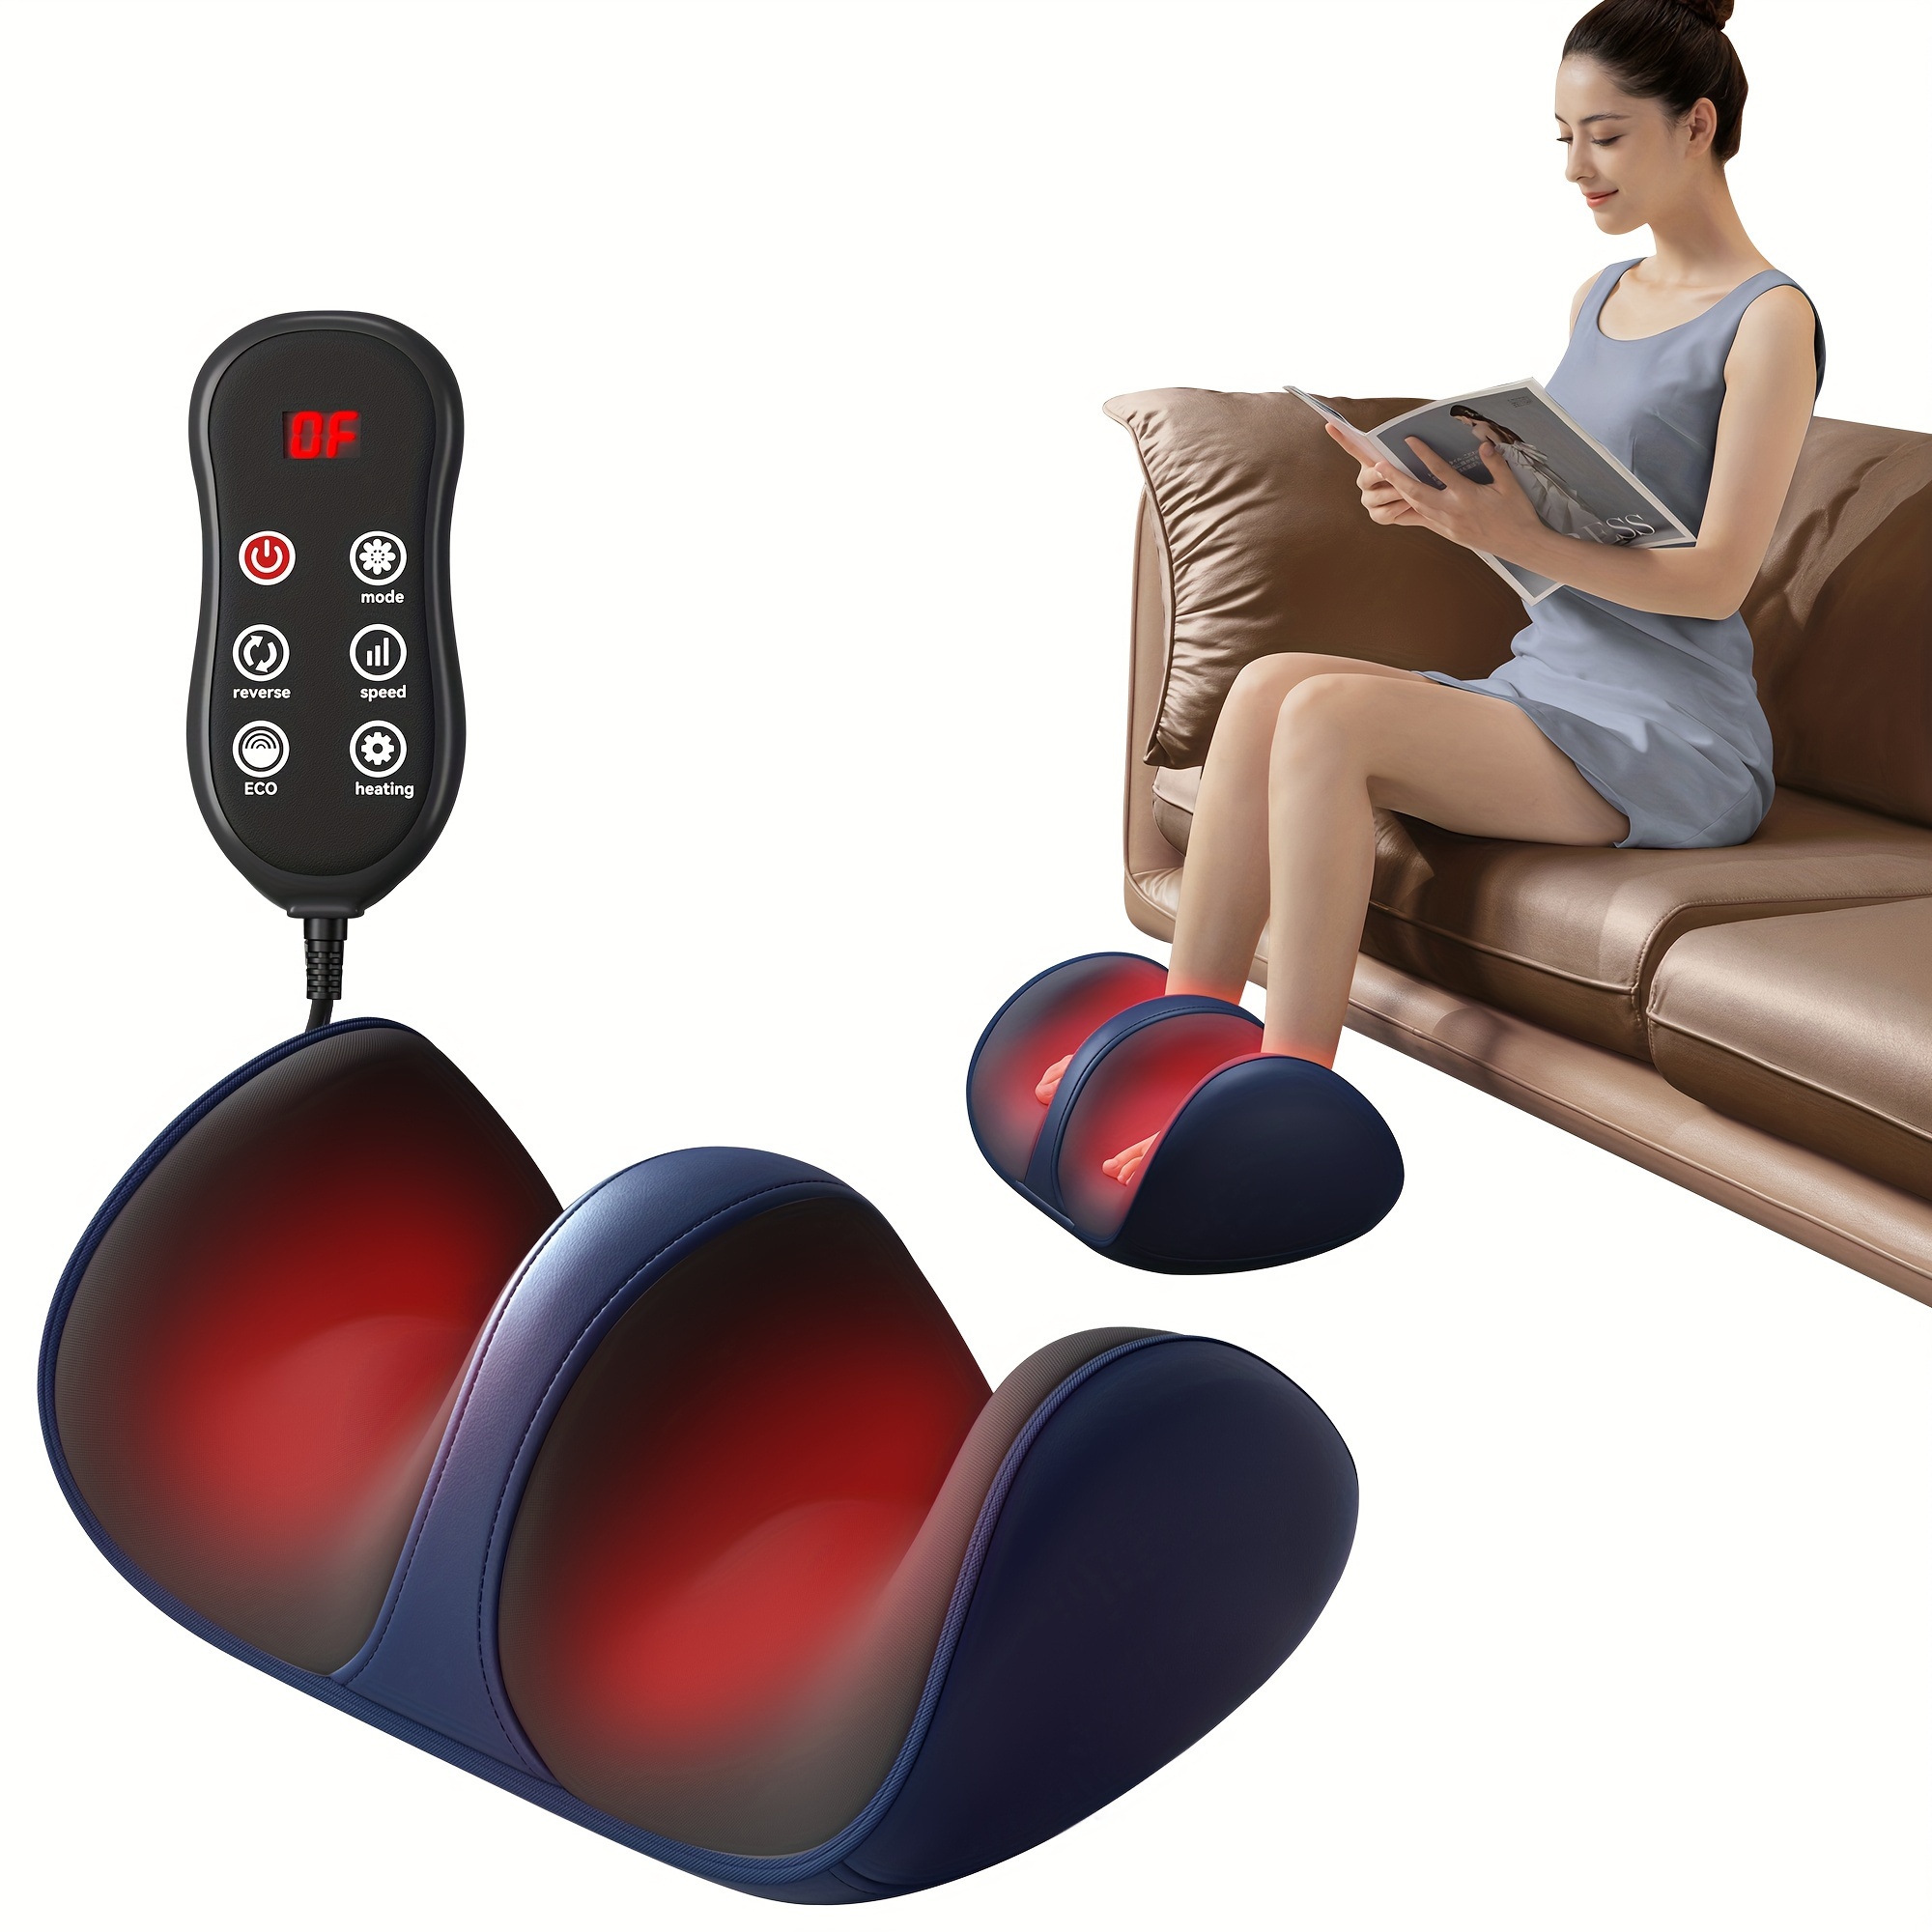 1pc 3d shiatsu foot massager deep kneading and heat foot massager helps muscle relaxation calf massager ideal christmas gift for mom dad and friends